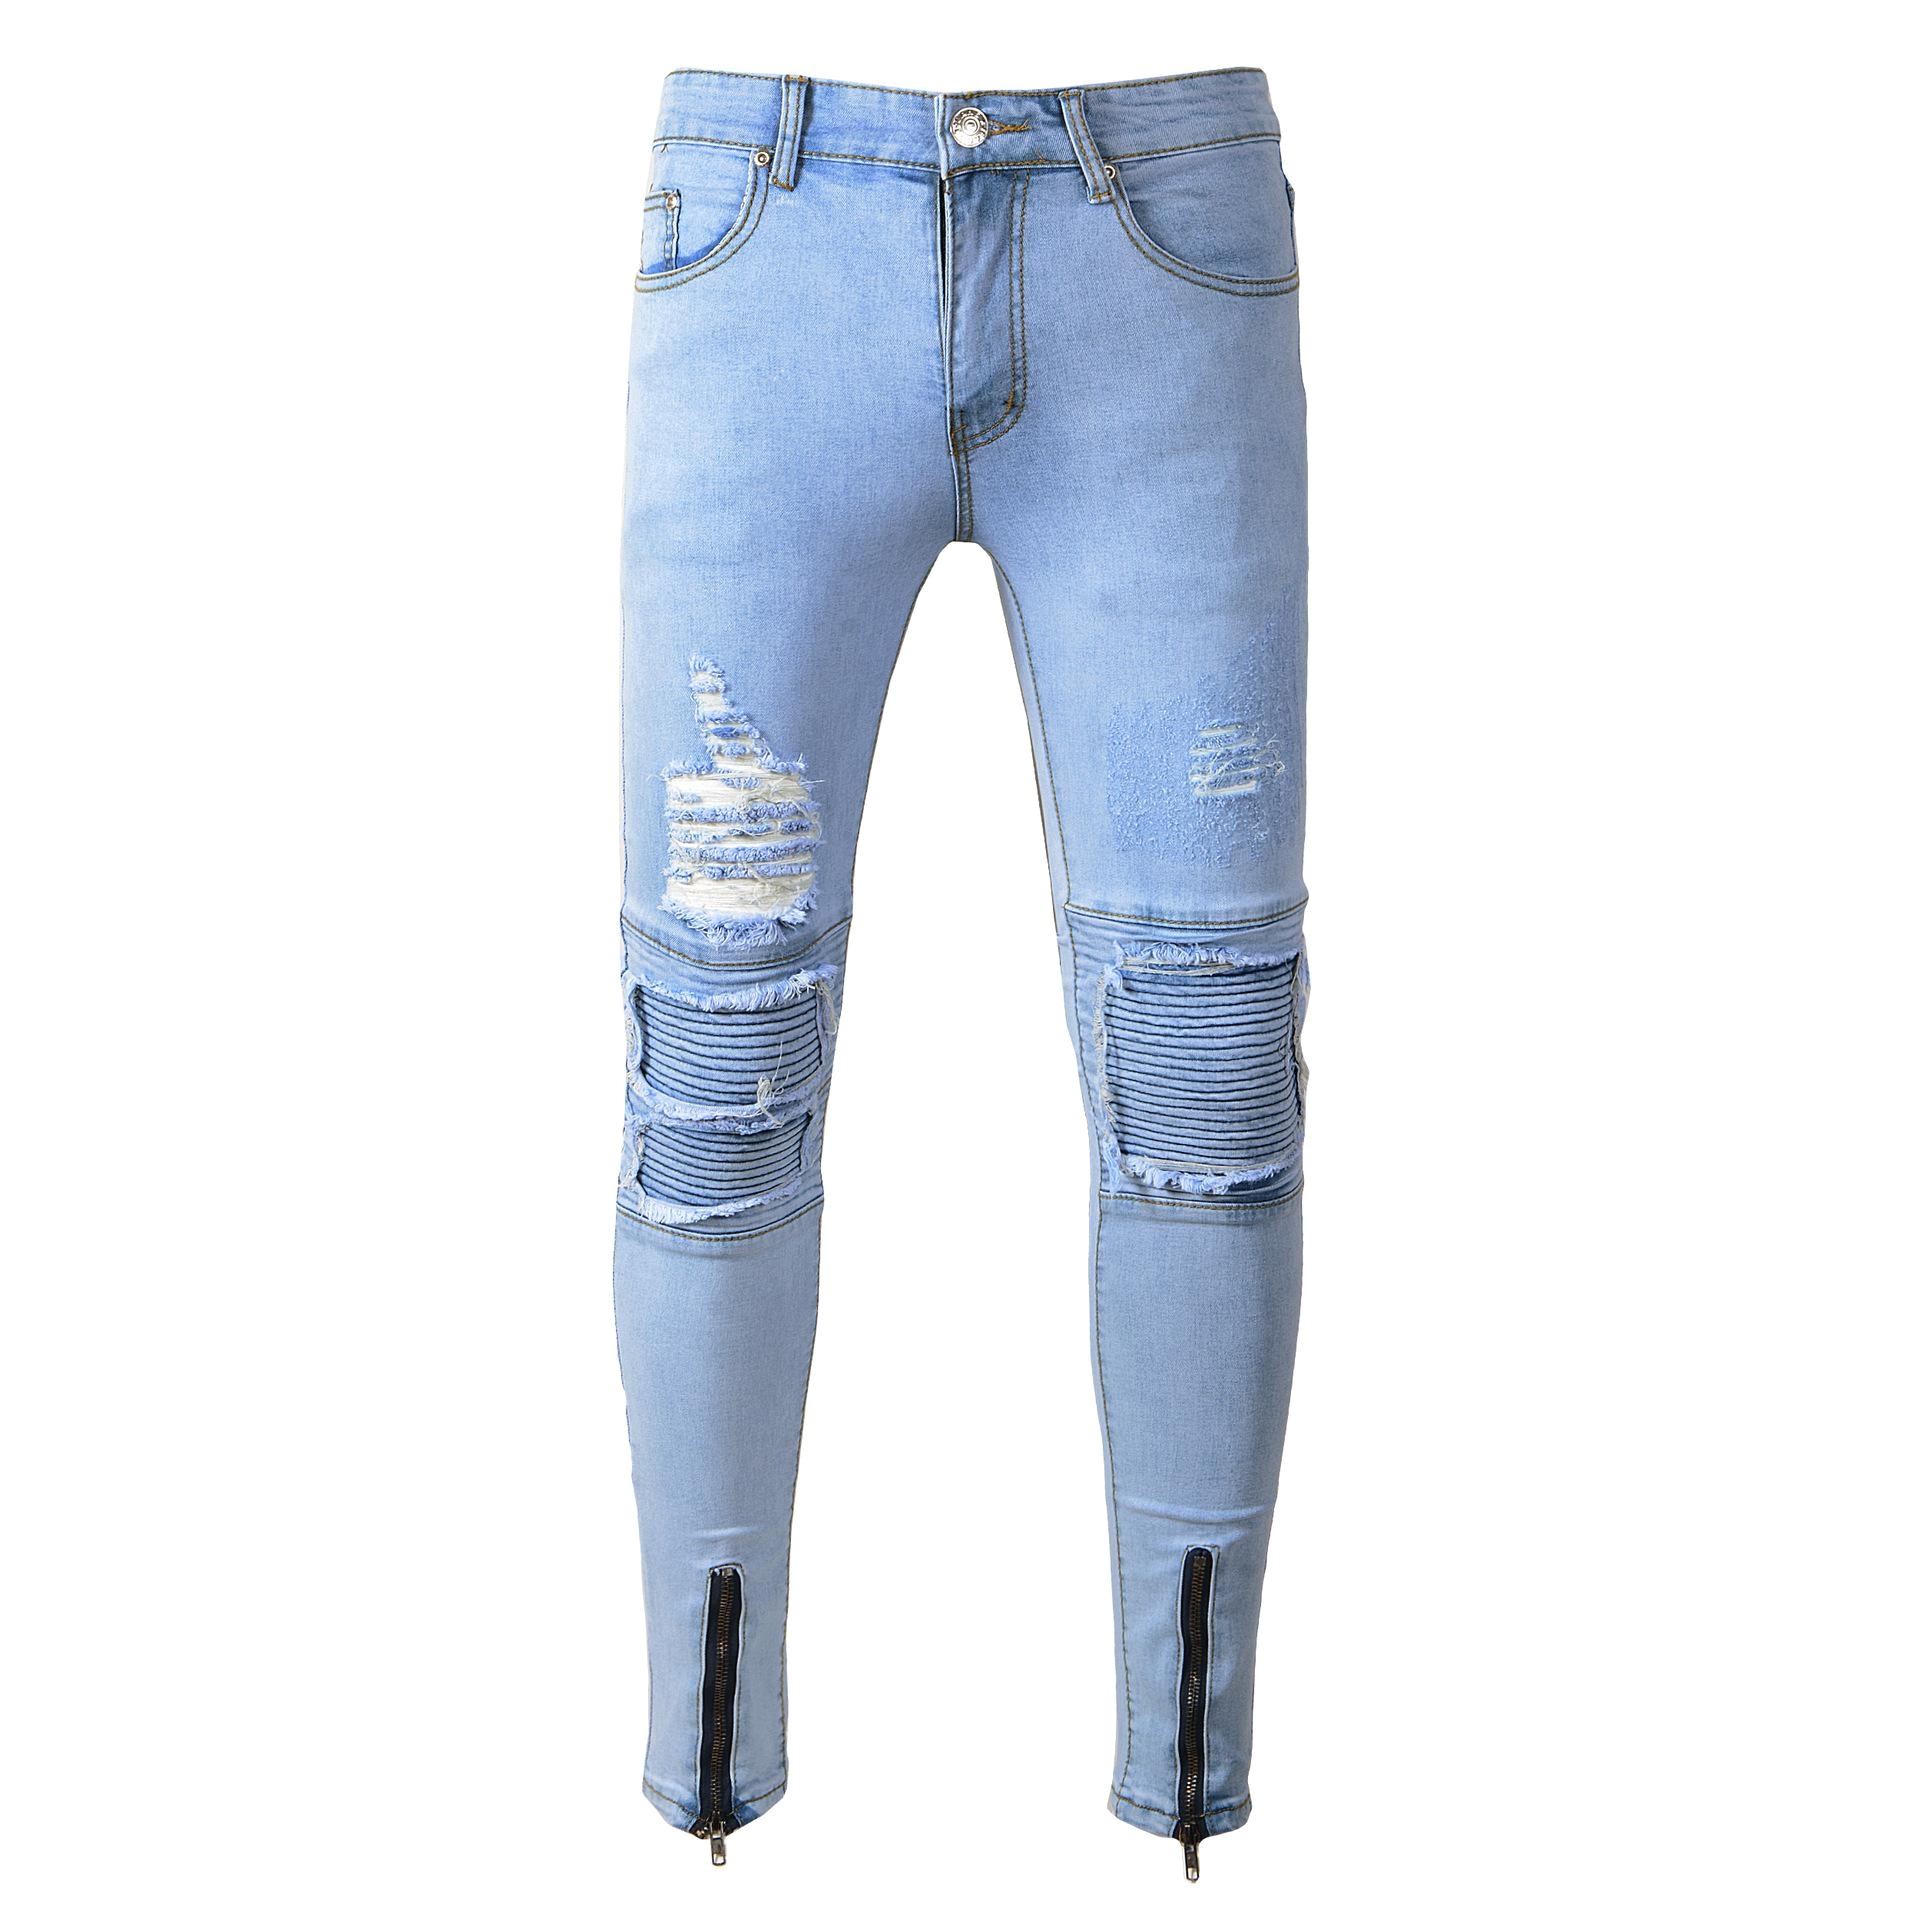 2018 fashion mens straight slim fit hole biker jeans light colored washed pencil pants ripped destroyed denim jeans hip hop streetwear blue from mizon88